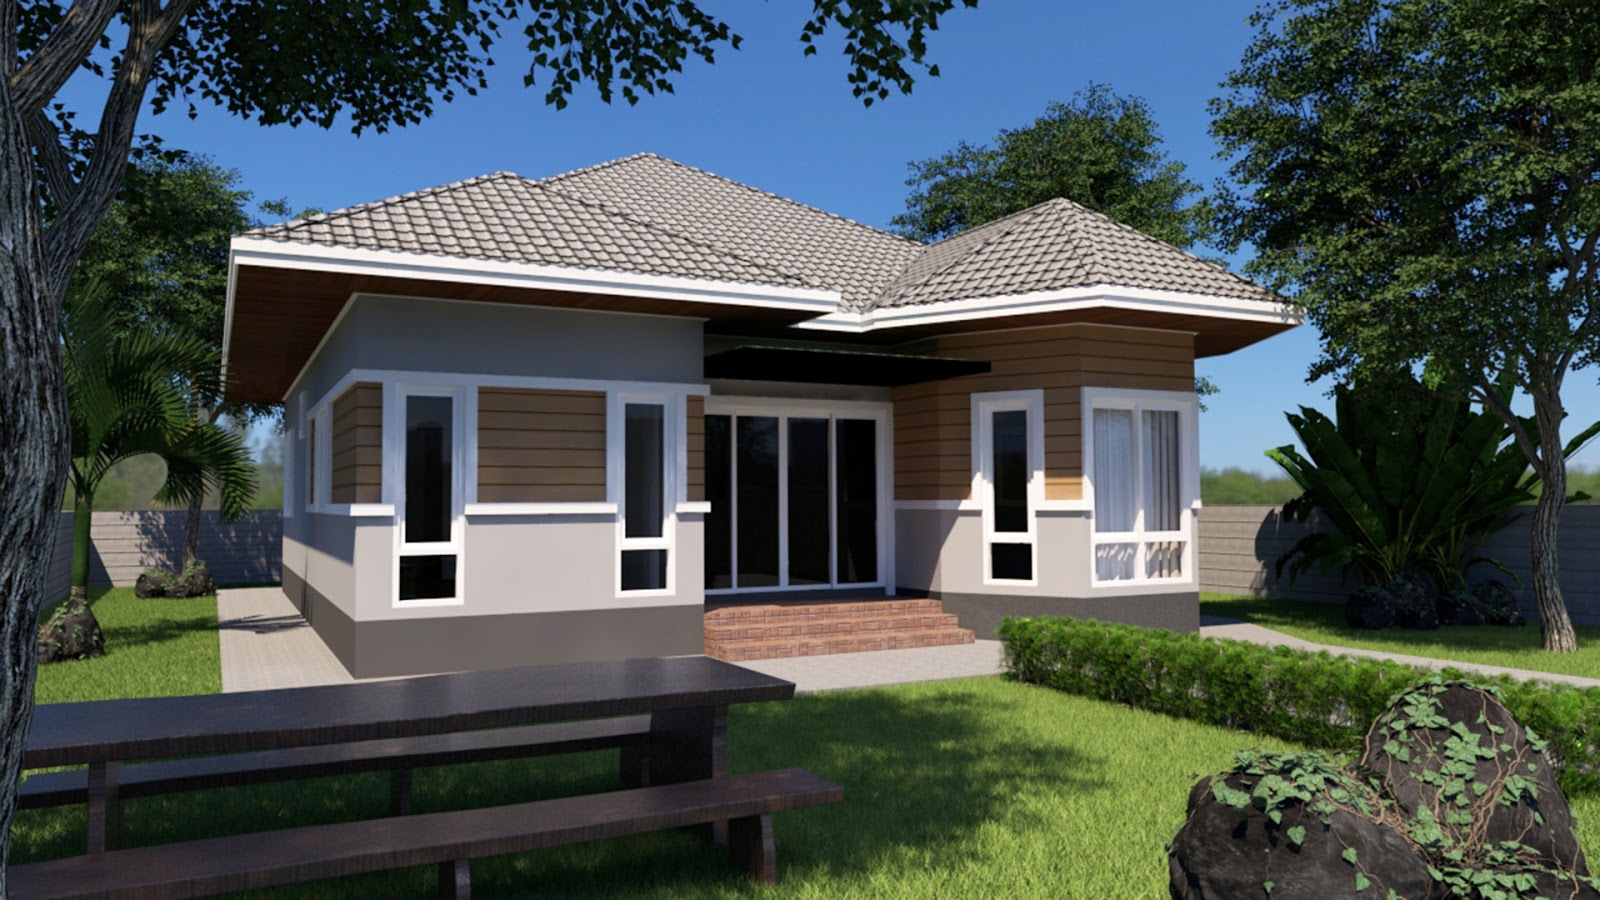 When it is time to build a house for your own family, it is important to consider their needs and get as many ideas you can for your plan. For a family with two or more children, a house with three bedrooms can be considered perfect or ideal family home. How about the design of the house? Do you love a spacious so that you and your family can freely move around? Aside from being a comfortable home, we also want a house with a timeless design so it will remain stylish for a long period of time right?  If you are looking for that kind of house, you may get some ideas in this post! We compiled 22 houses with floor plans designed to have two to three-bedrooms to meet the needs of the family. All are projects of ubon338.com in Thailand.